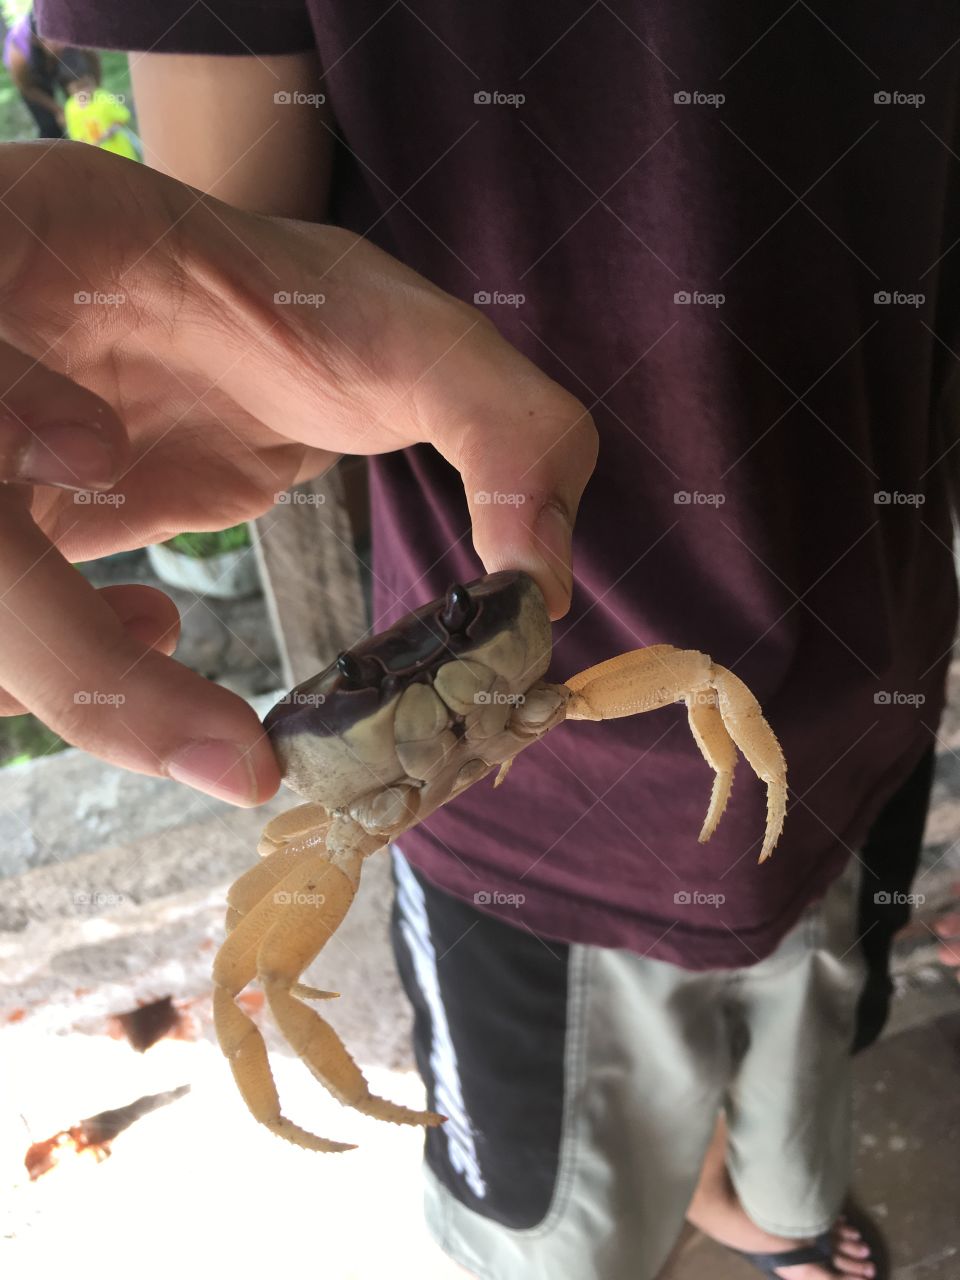 Holding a crab